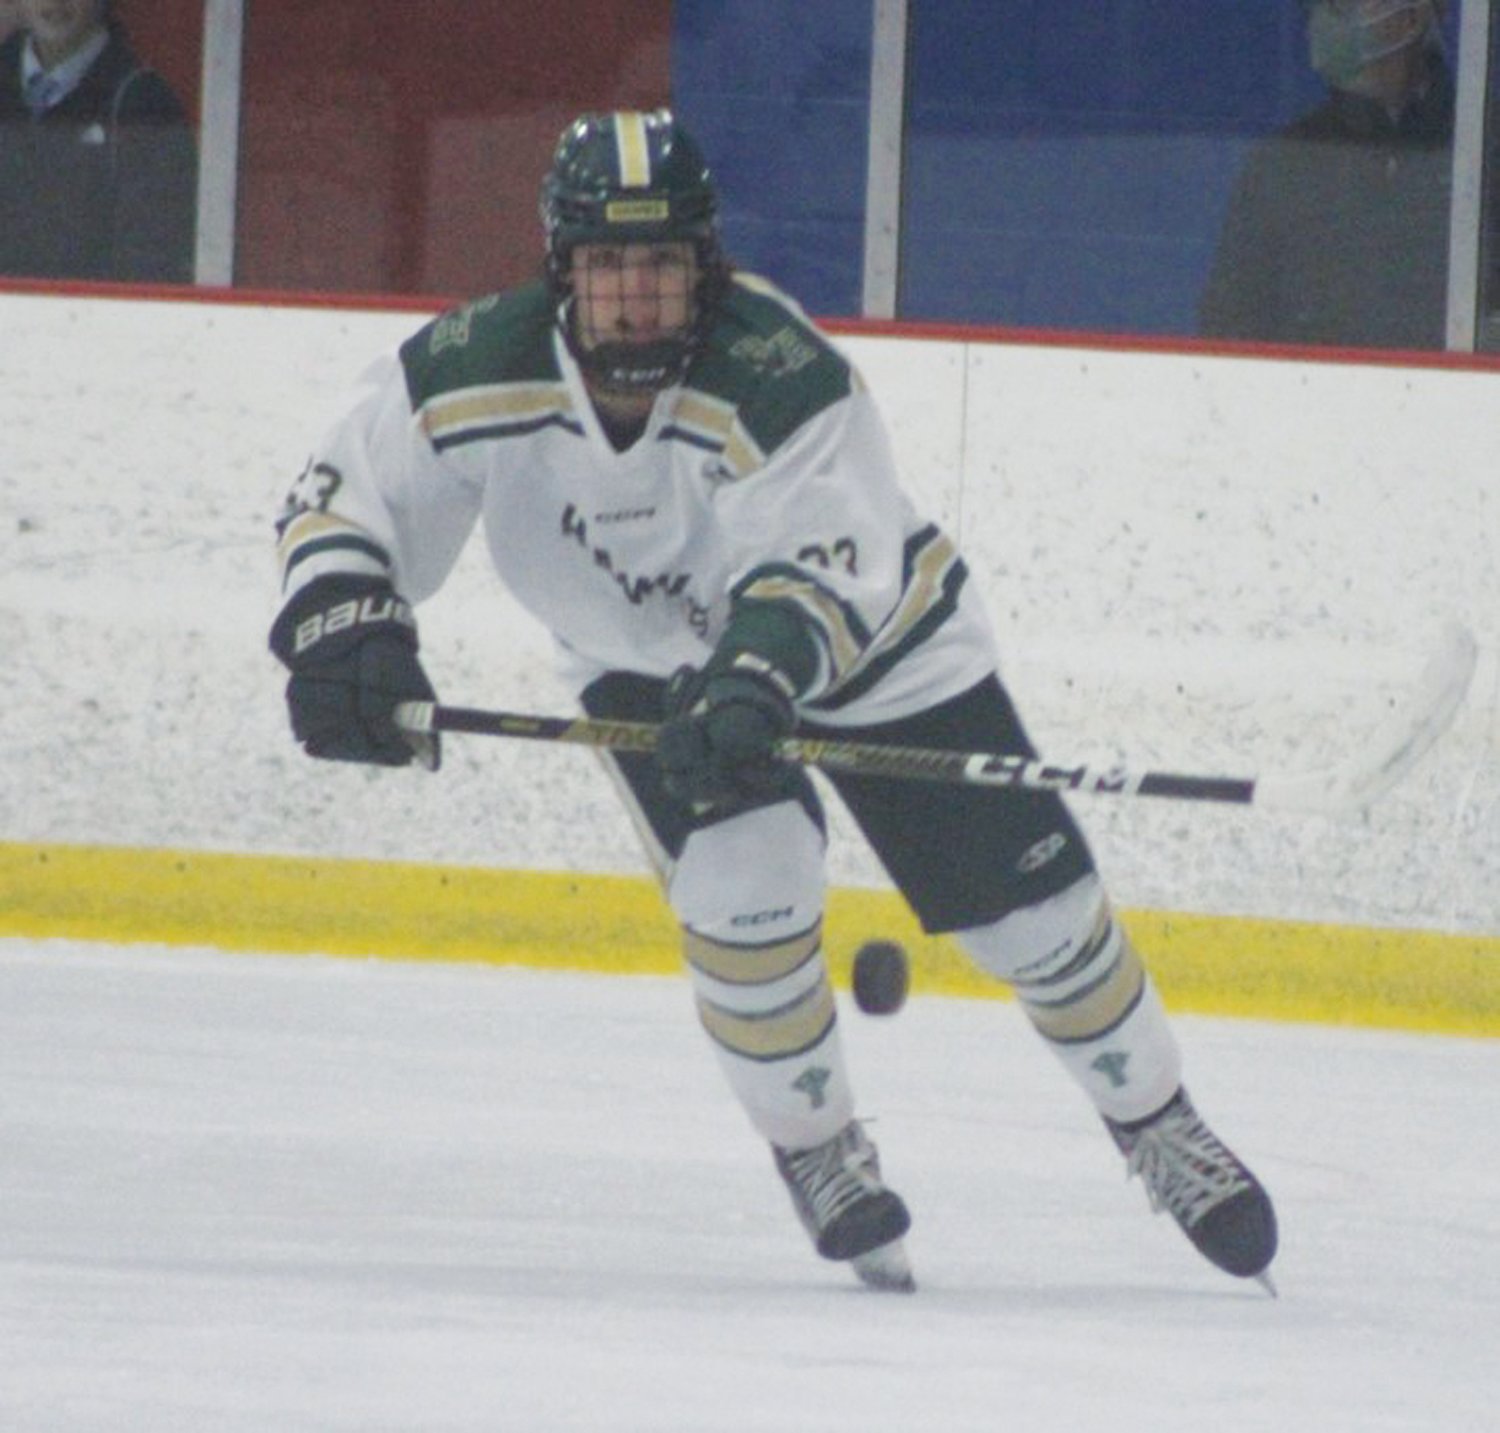 CLEAR THE ZONE: Hendricken’s Frank Tillinghast sends the puck up the ice.